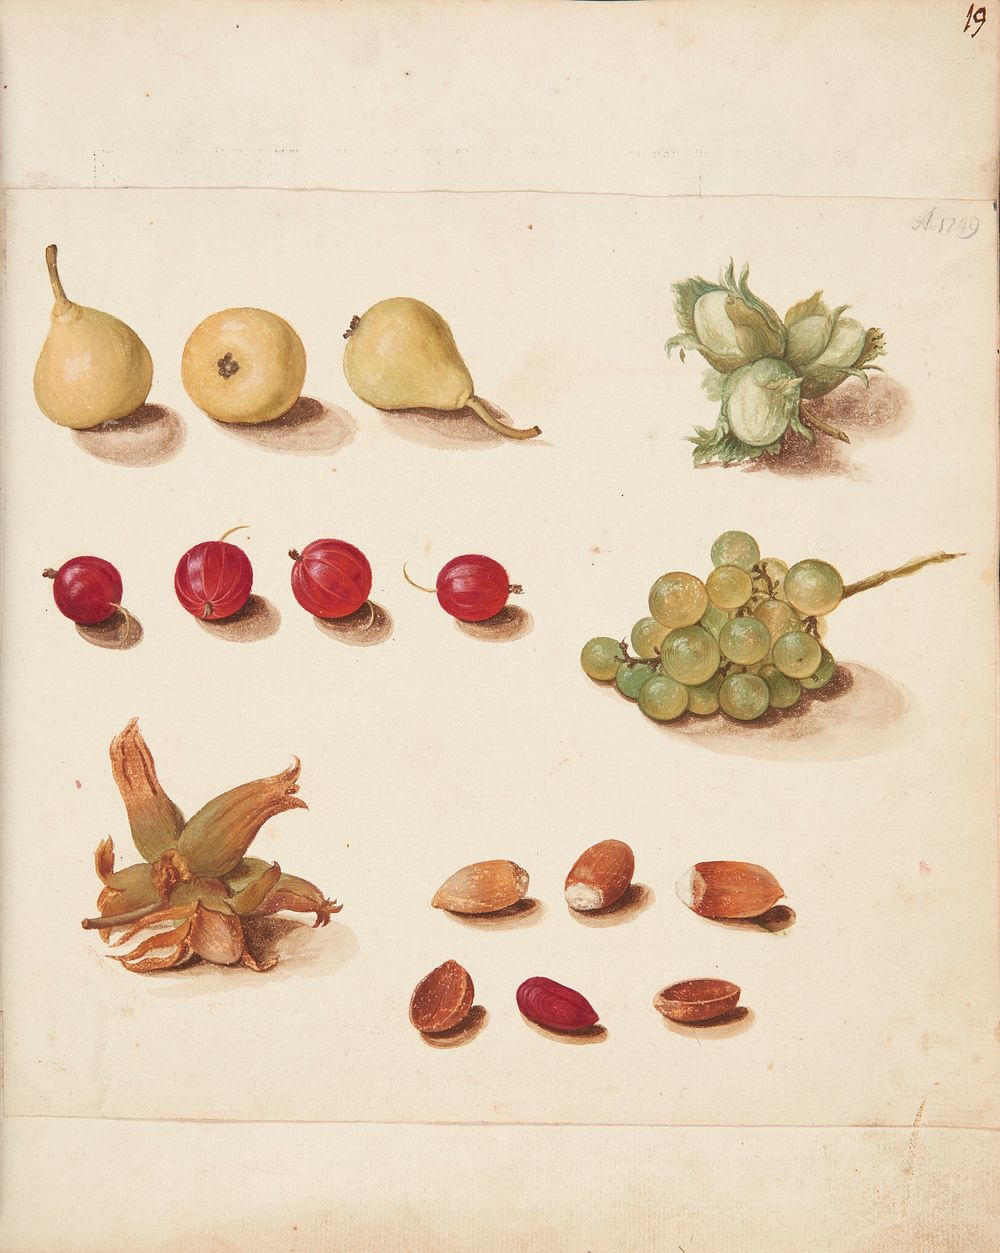 Study of fruits, berries, and nuts by Johanna Fosie